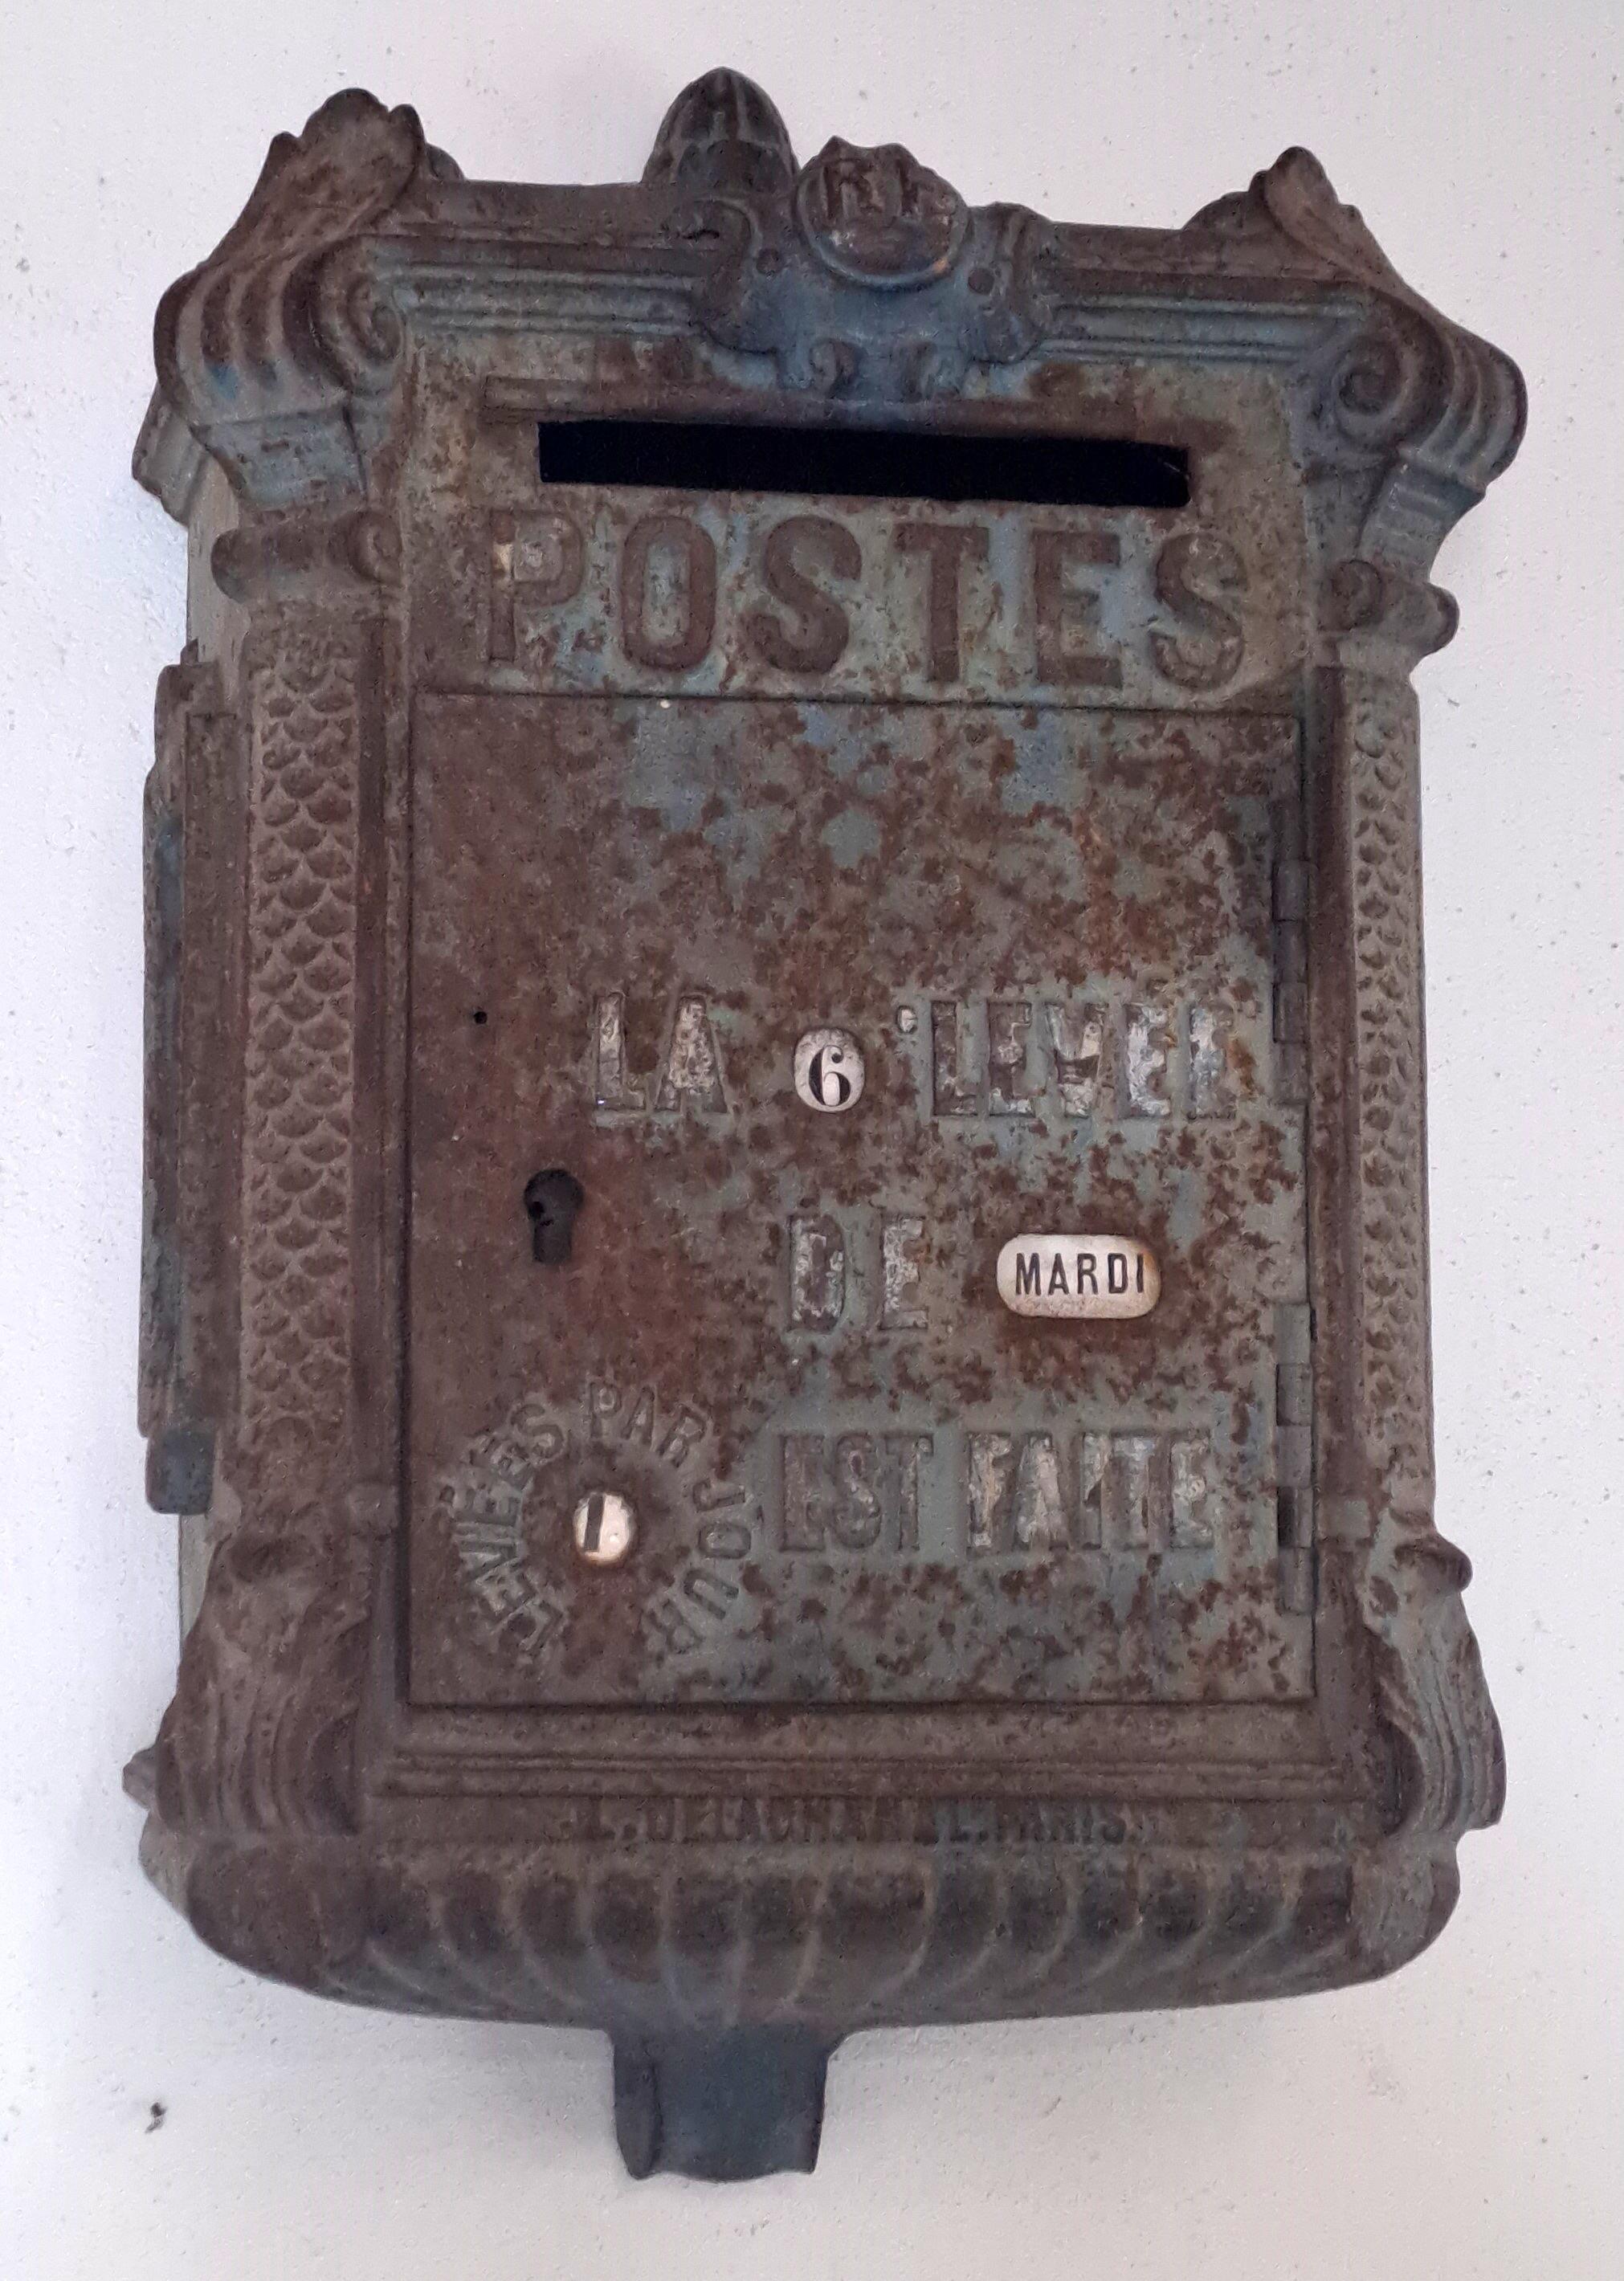 French Post Office Mailbox - Cast Iron - Delachanal Model - Late 19th Century For Sale 3